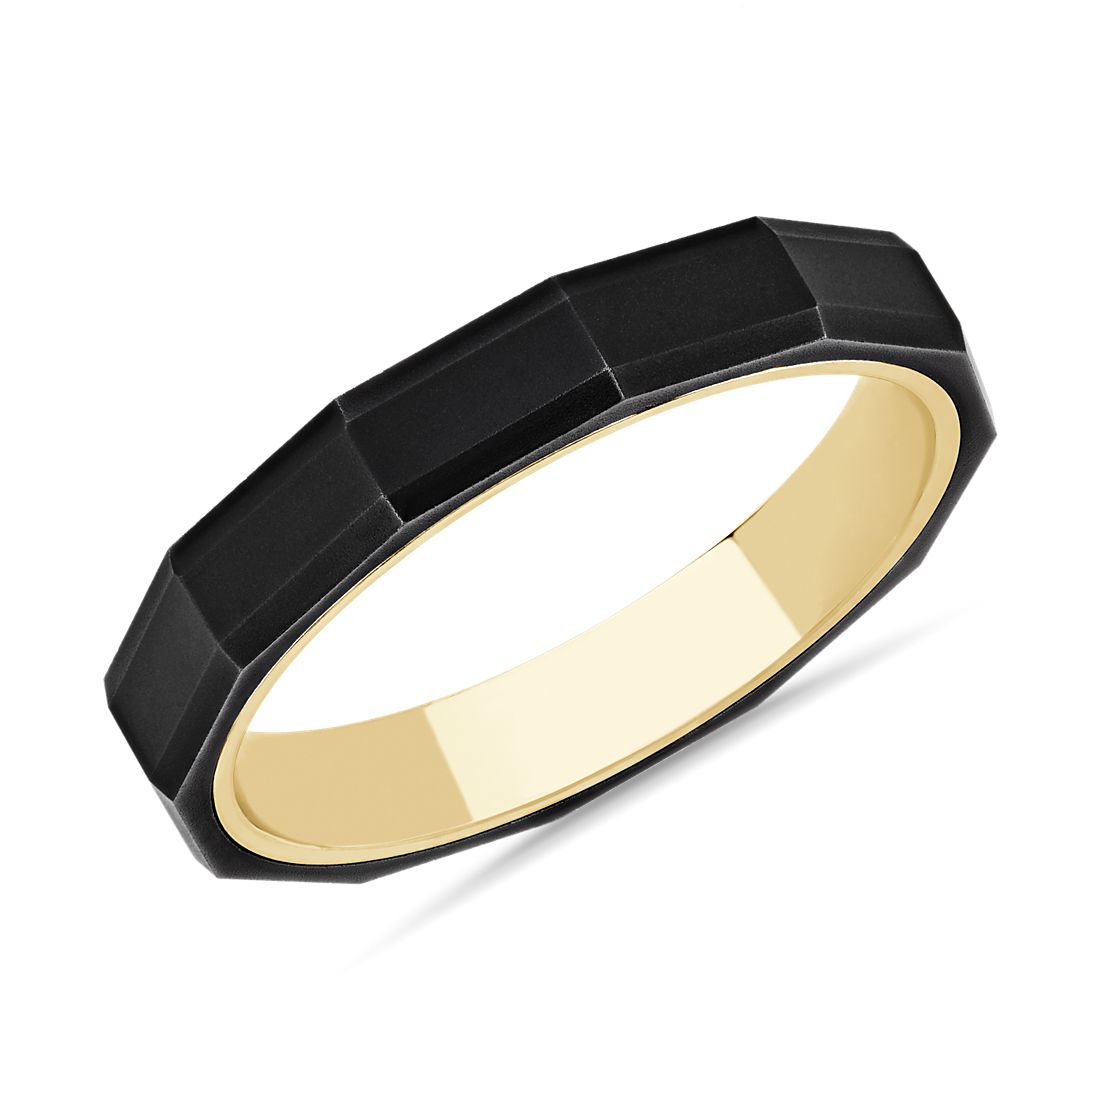 Faceted Profile Flat Edge Contemporary Ring in Tungsten and 14k Yellow Gold (4mm)